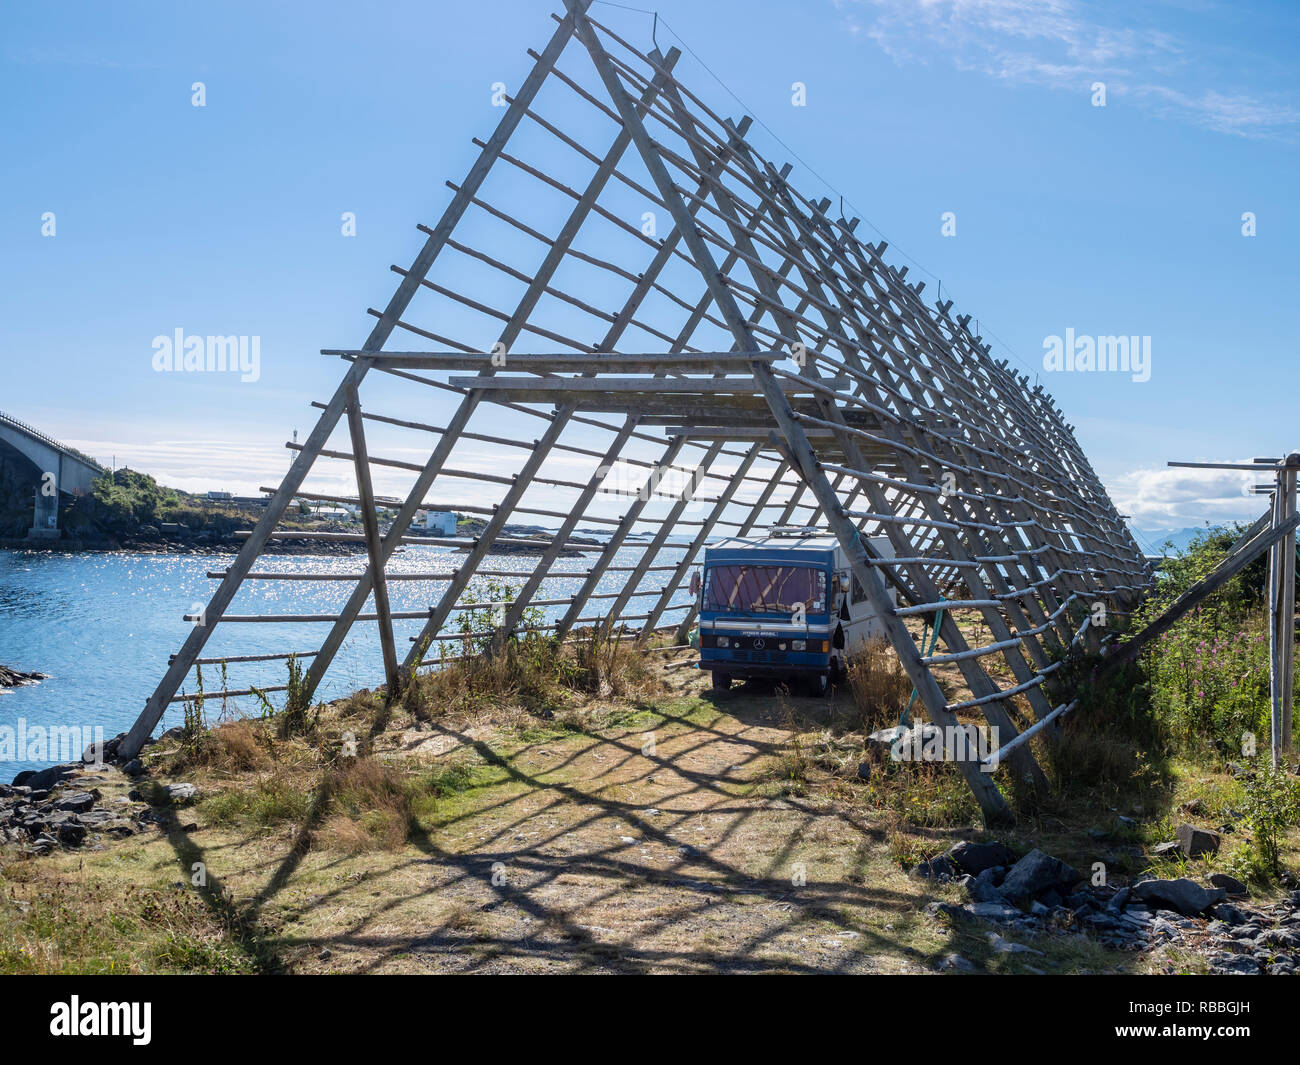 Mobile home,  oldtimer,  parks below wooden drying rack usually used to dry cod in winter, Henningsvaer, Austvagöy, Lofoten, Norway - licence plate di Stock Photo